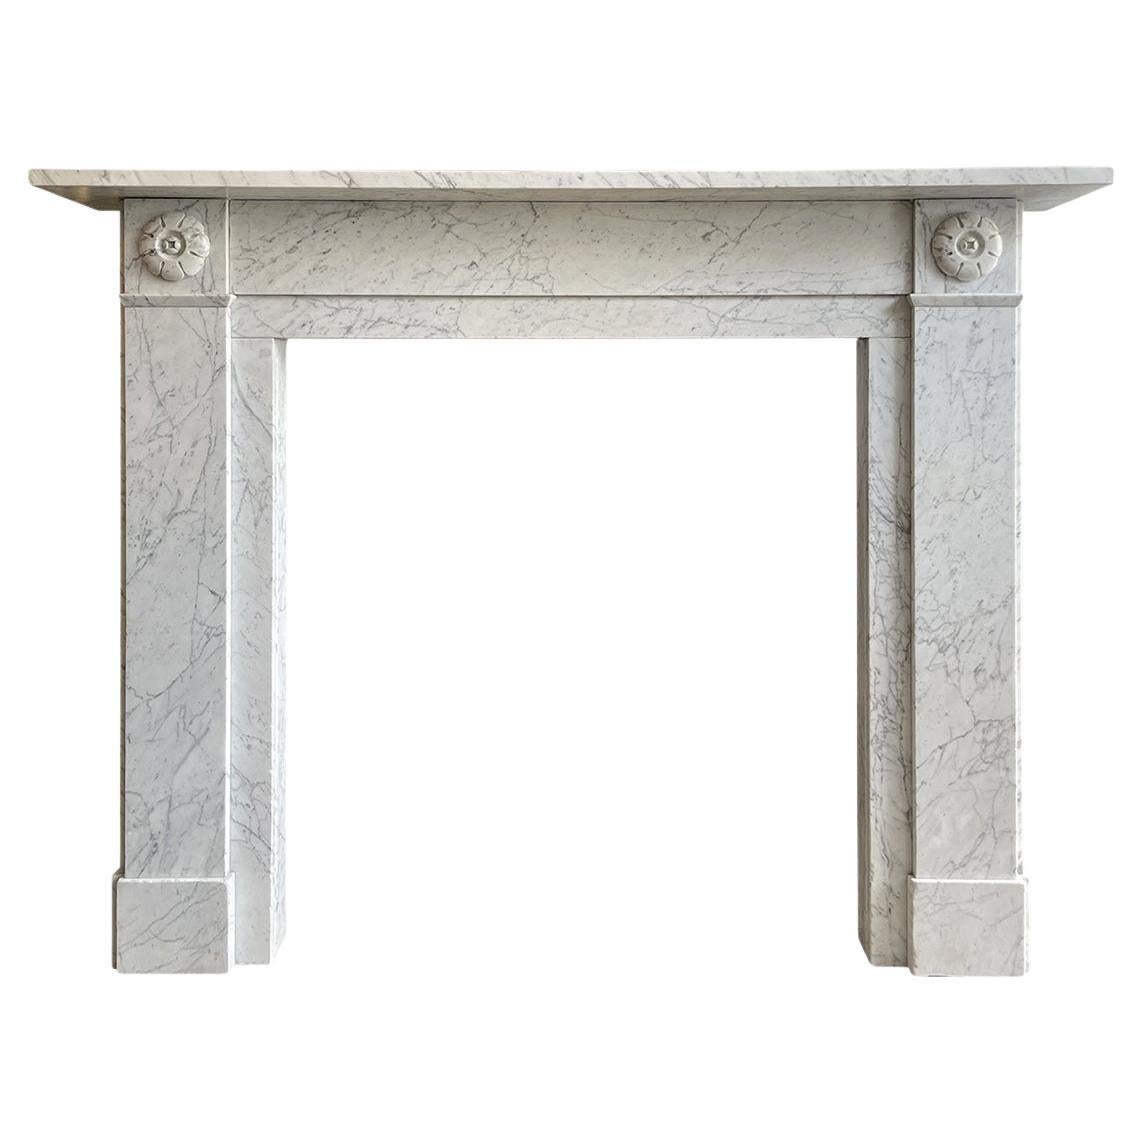 Welsh Fireplaces and Mantels